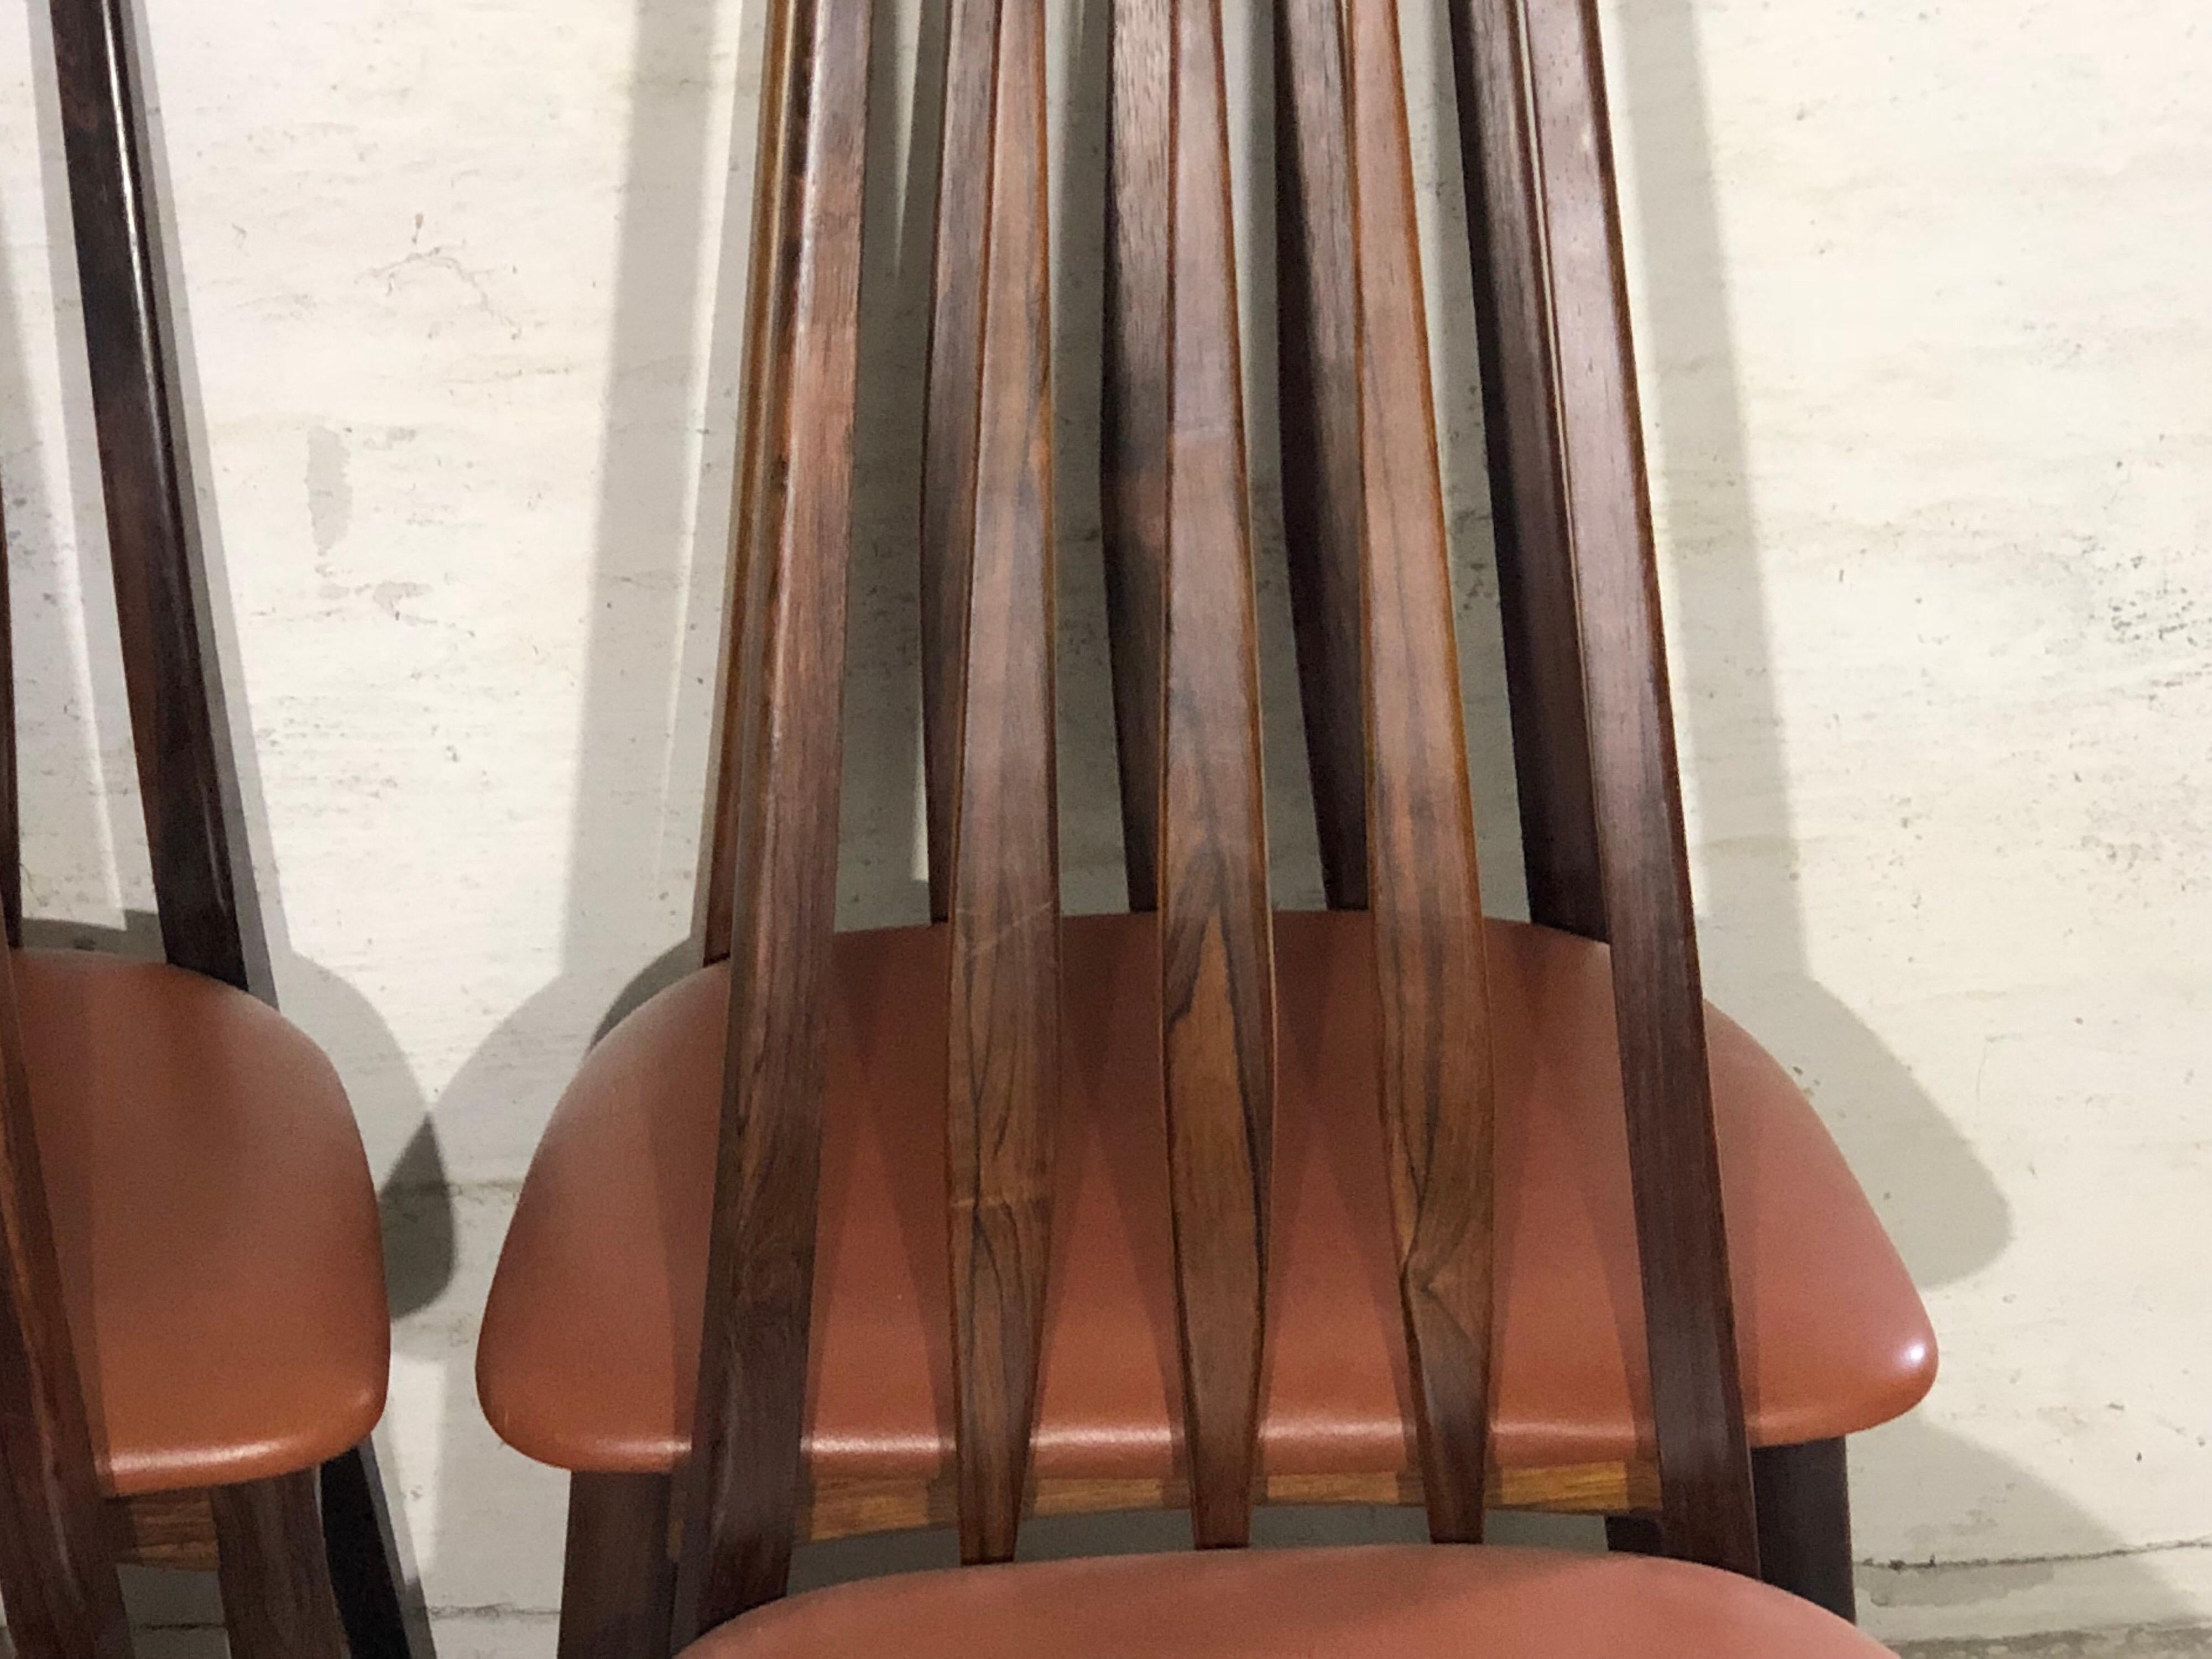 Set of 4 rosewood dining chairs by Niels Kofod Larsen, Model Eva, Danish Mid-Century Modern.
The chairs are in very good condition and has stunning details in the wood. Upholstery in red leather.